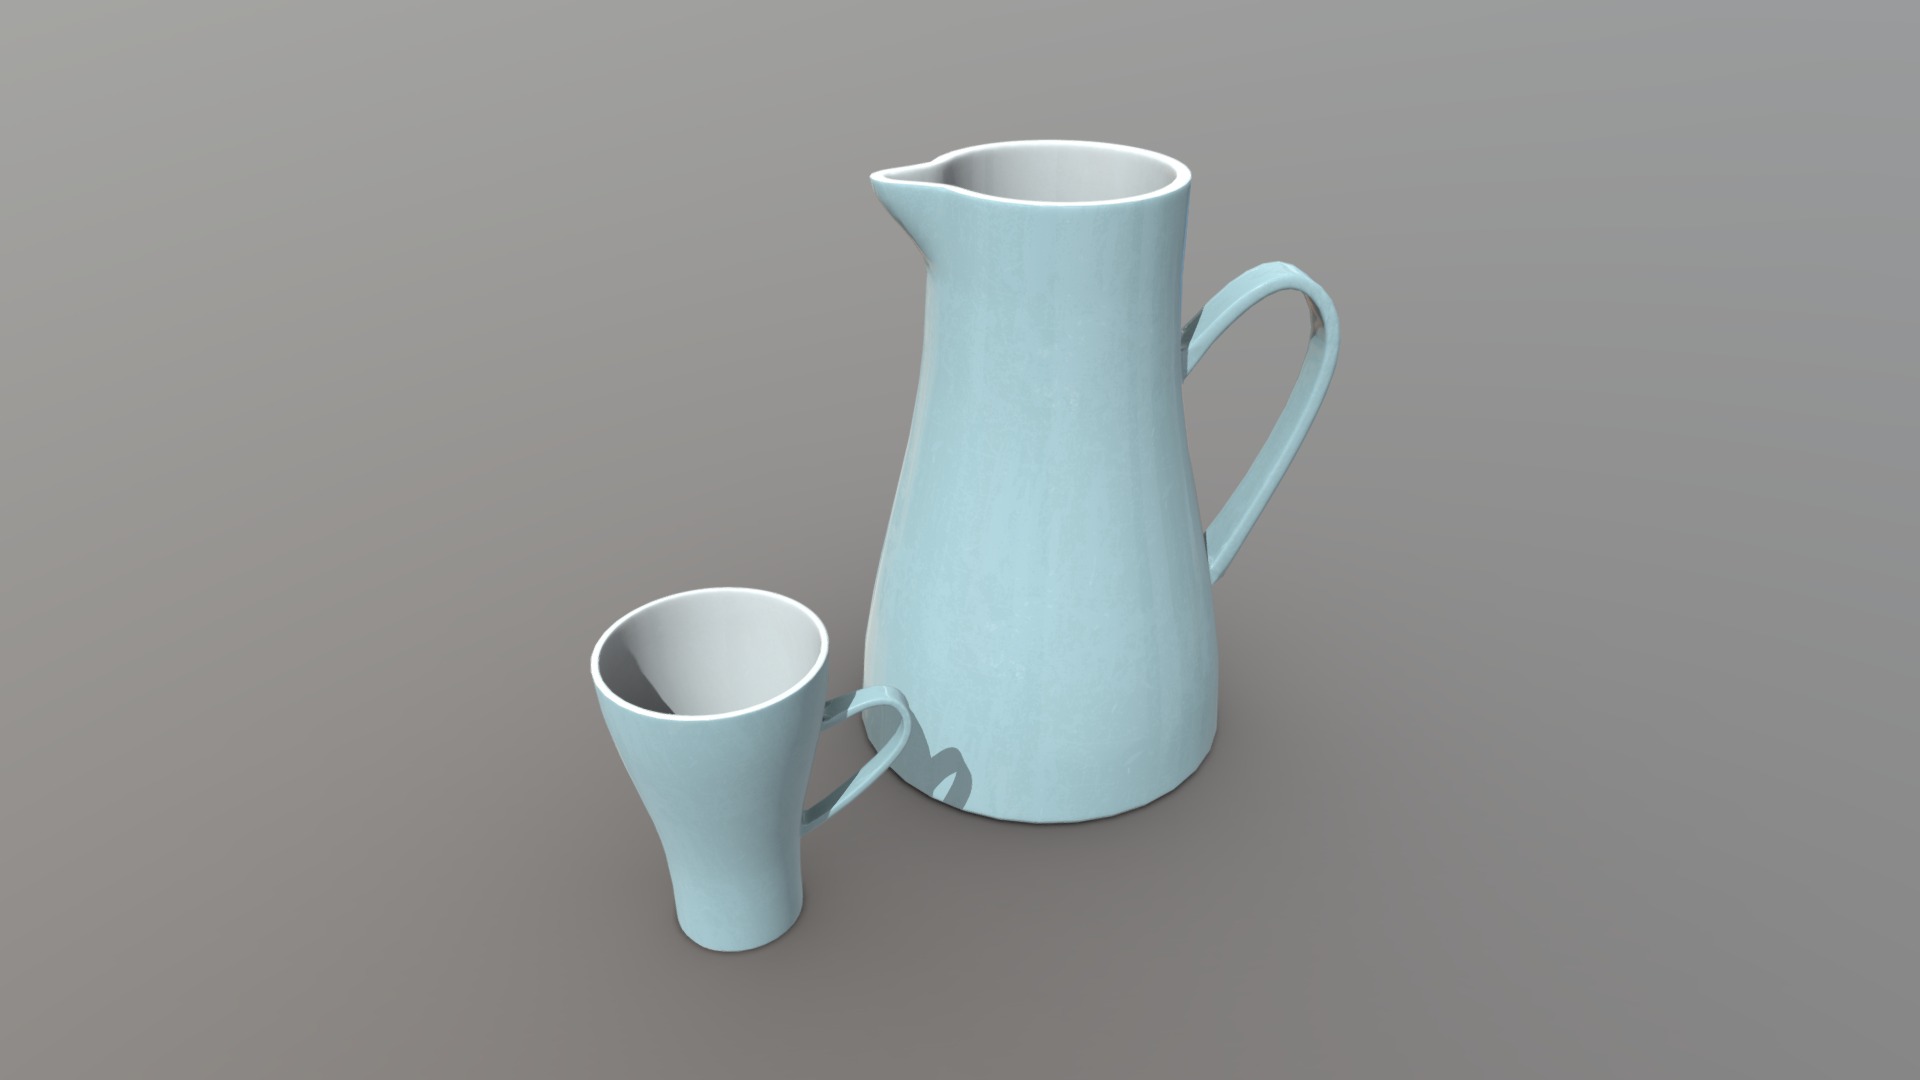 3D model Jug And Mug - This is a 3D model of the Jug And Mug. The 3D model is about a white tea cup and a white mug.